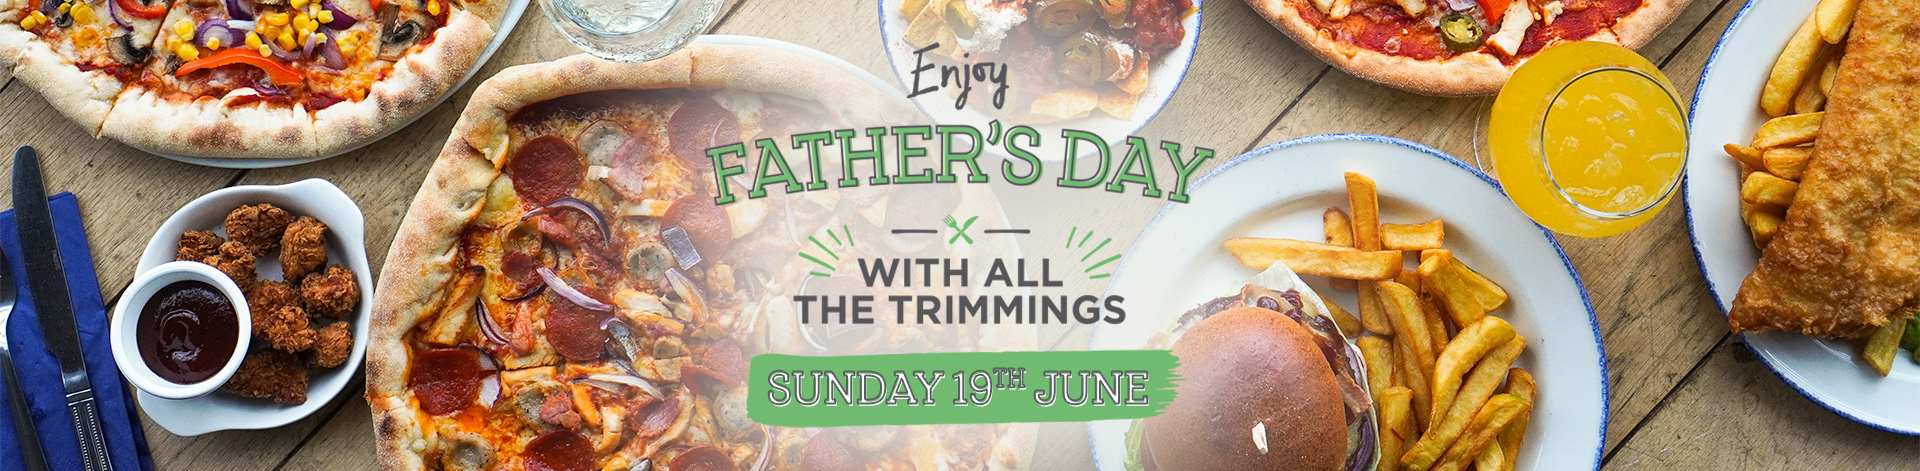 Fathers Day at The Pretty Pigs